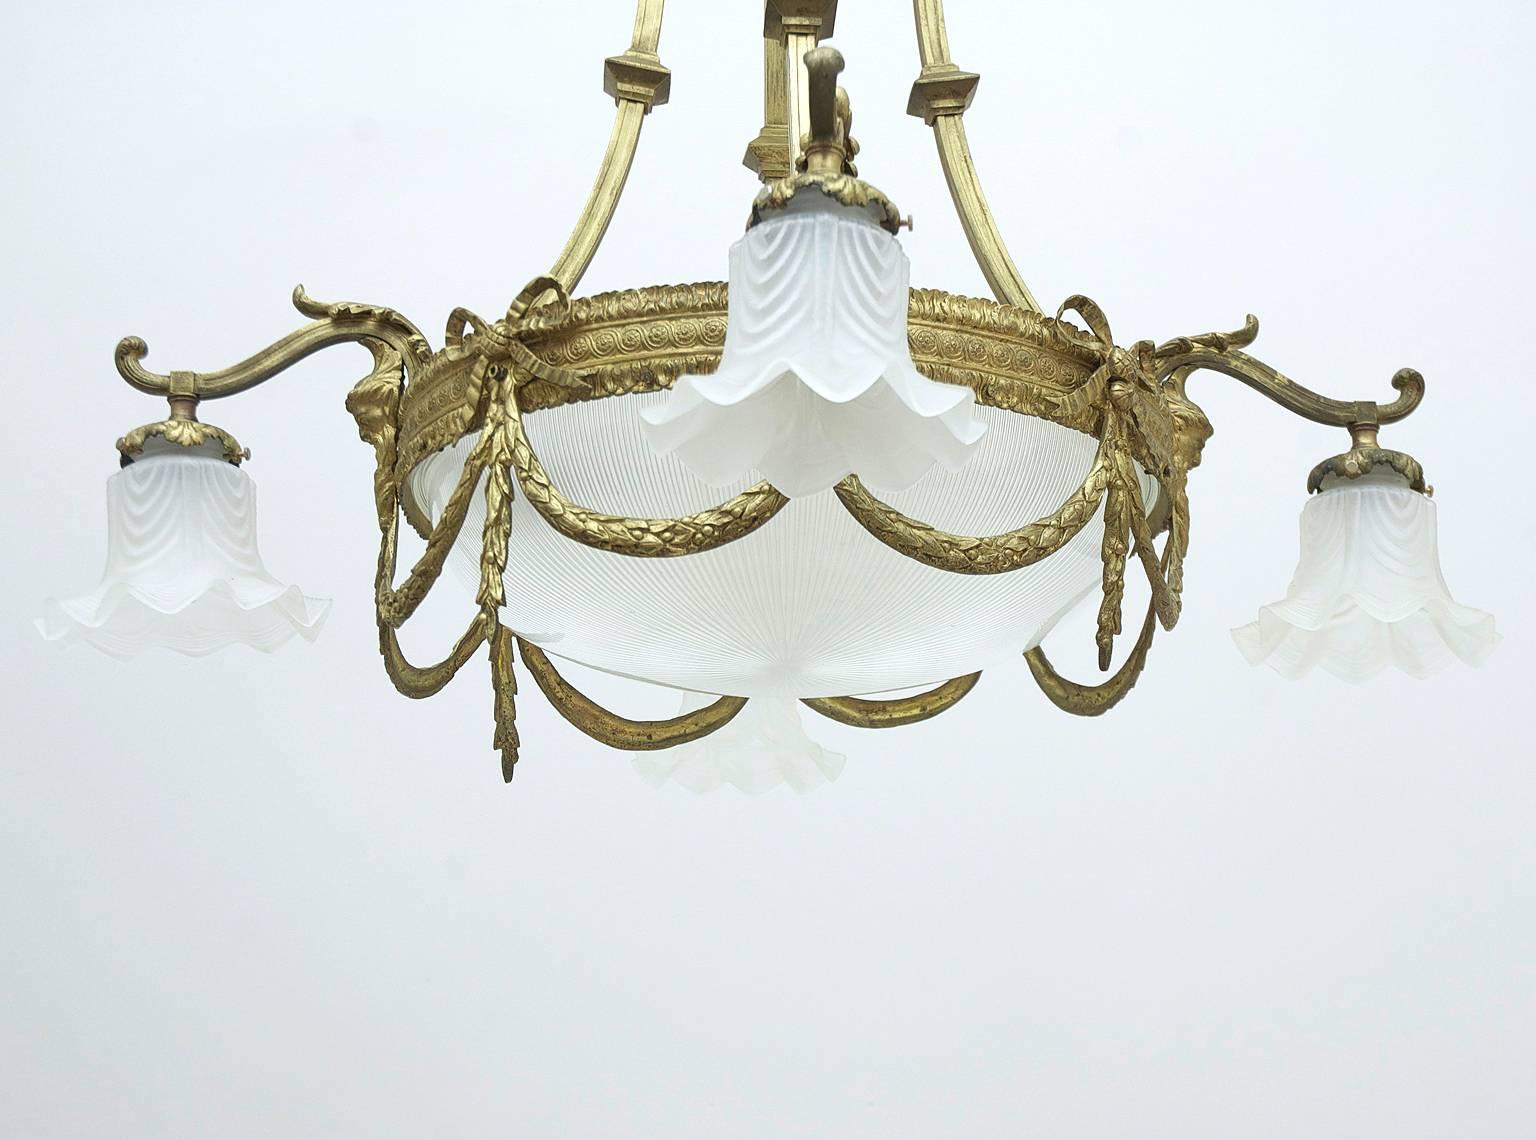 A lovely French Belle Epouque chandelier in bronze doré with eight lights featuring Louis XVI style swags and bows with fluted and flounced glass globes.

Measures: Drop: 36" x Diameter: 32".